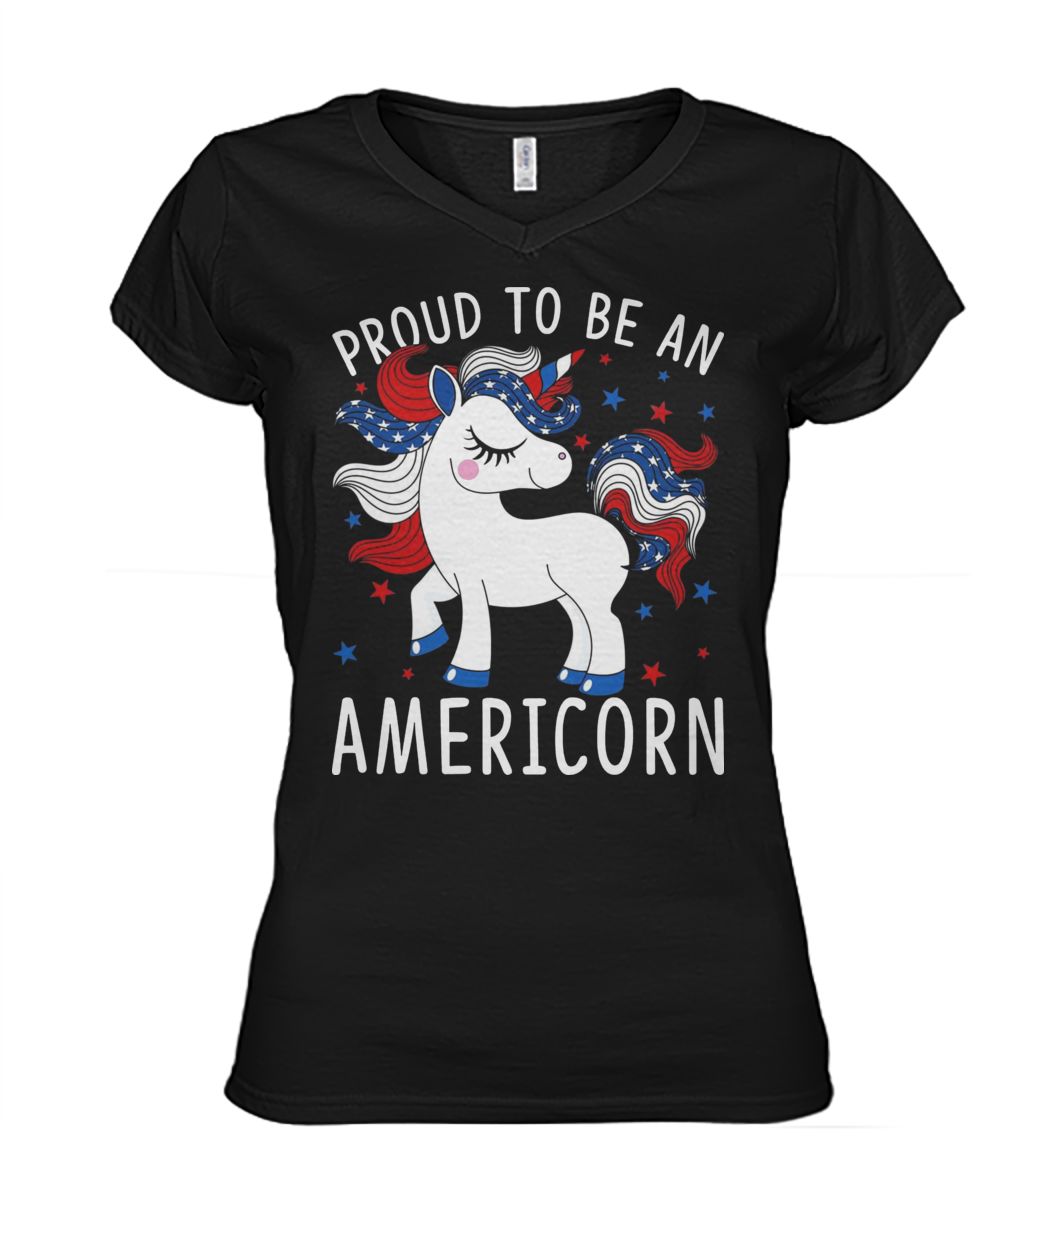 Proud to be an americorn 4th of july women's v-neck